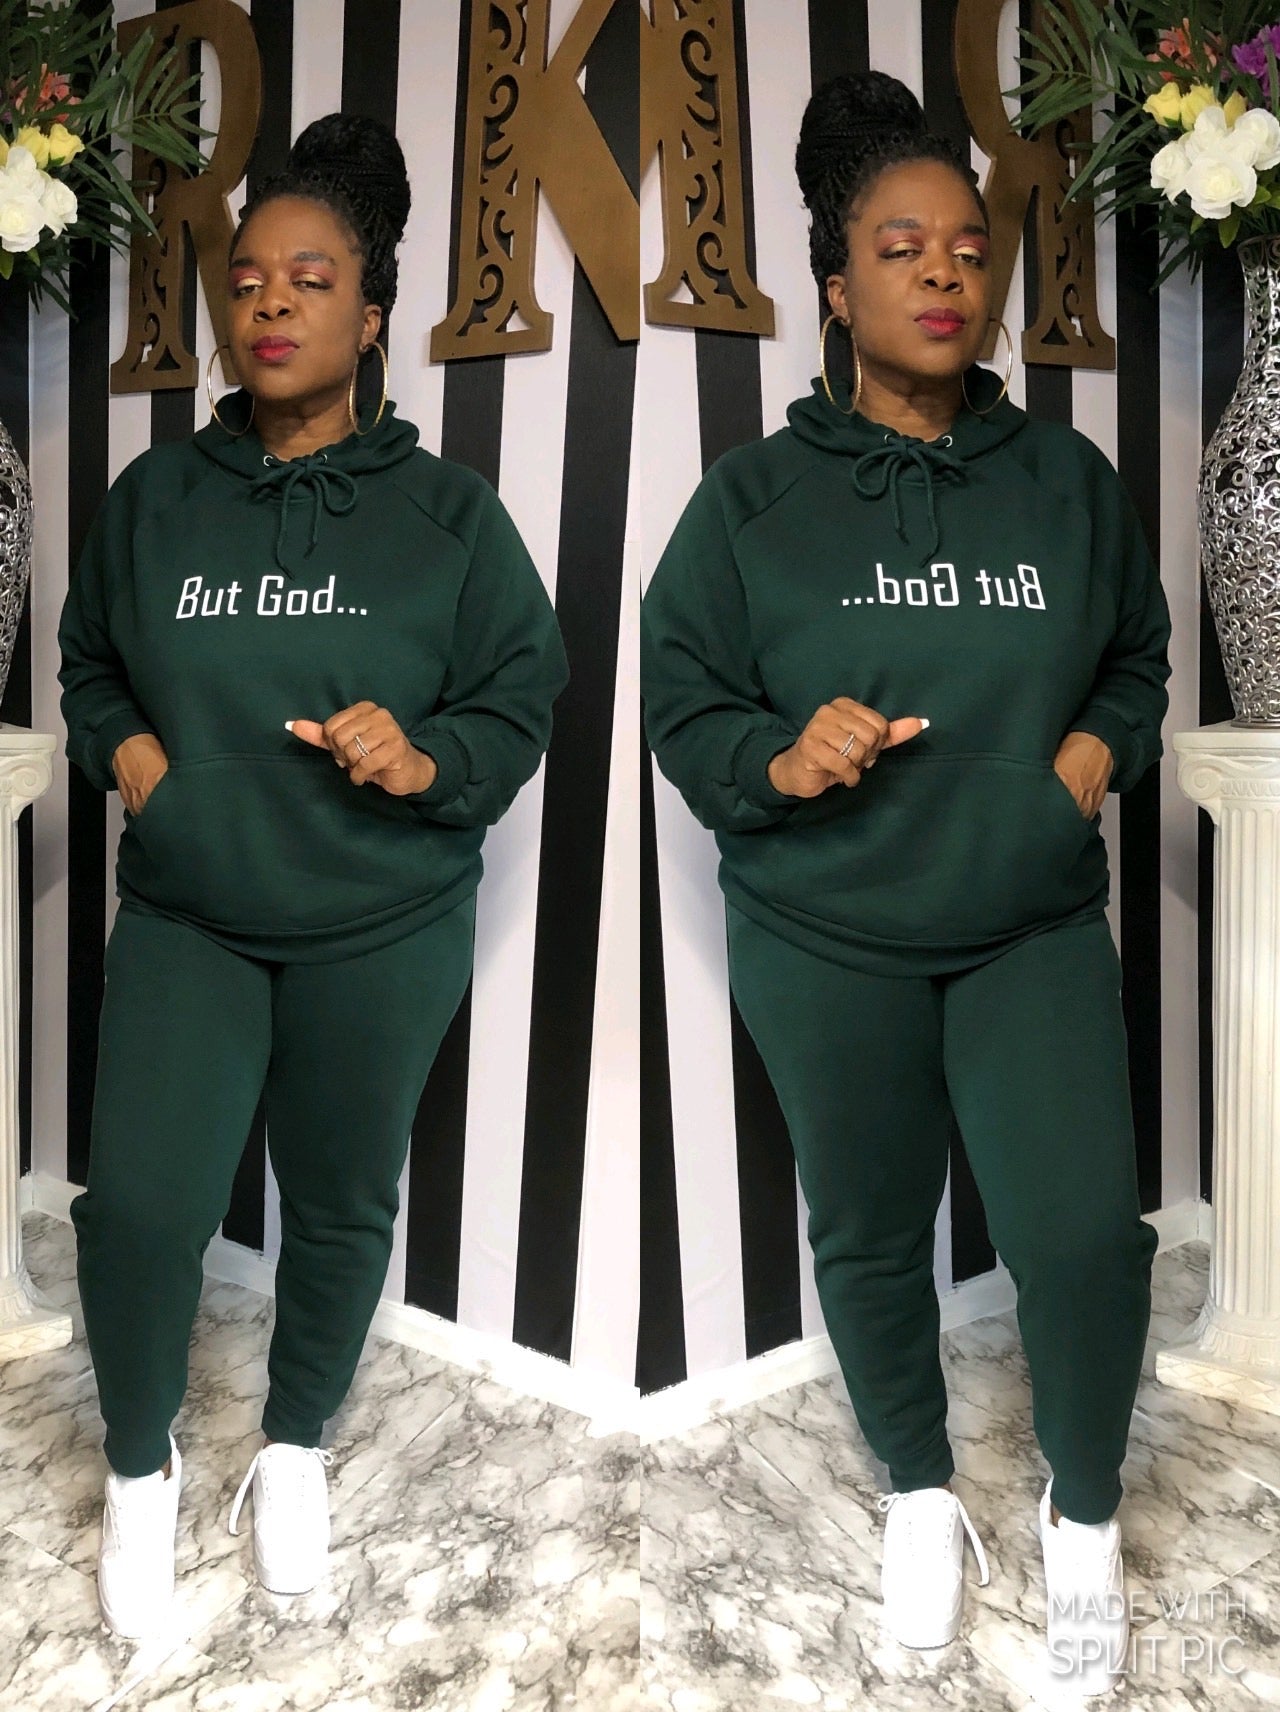 “But God” Two Piece Jogging Suit Set in Hunter Green (Plus)